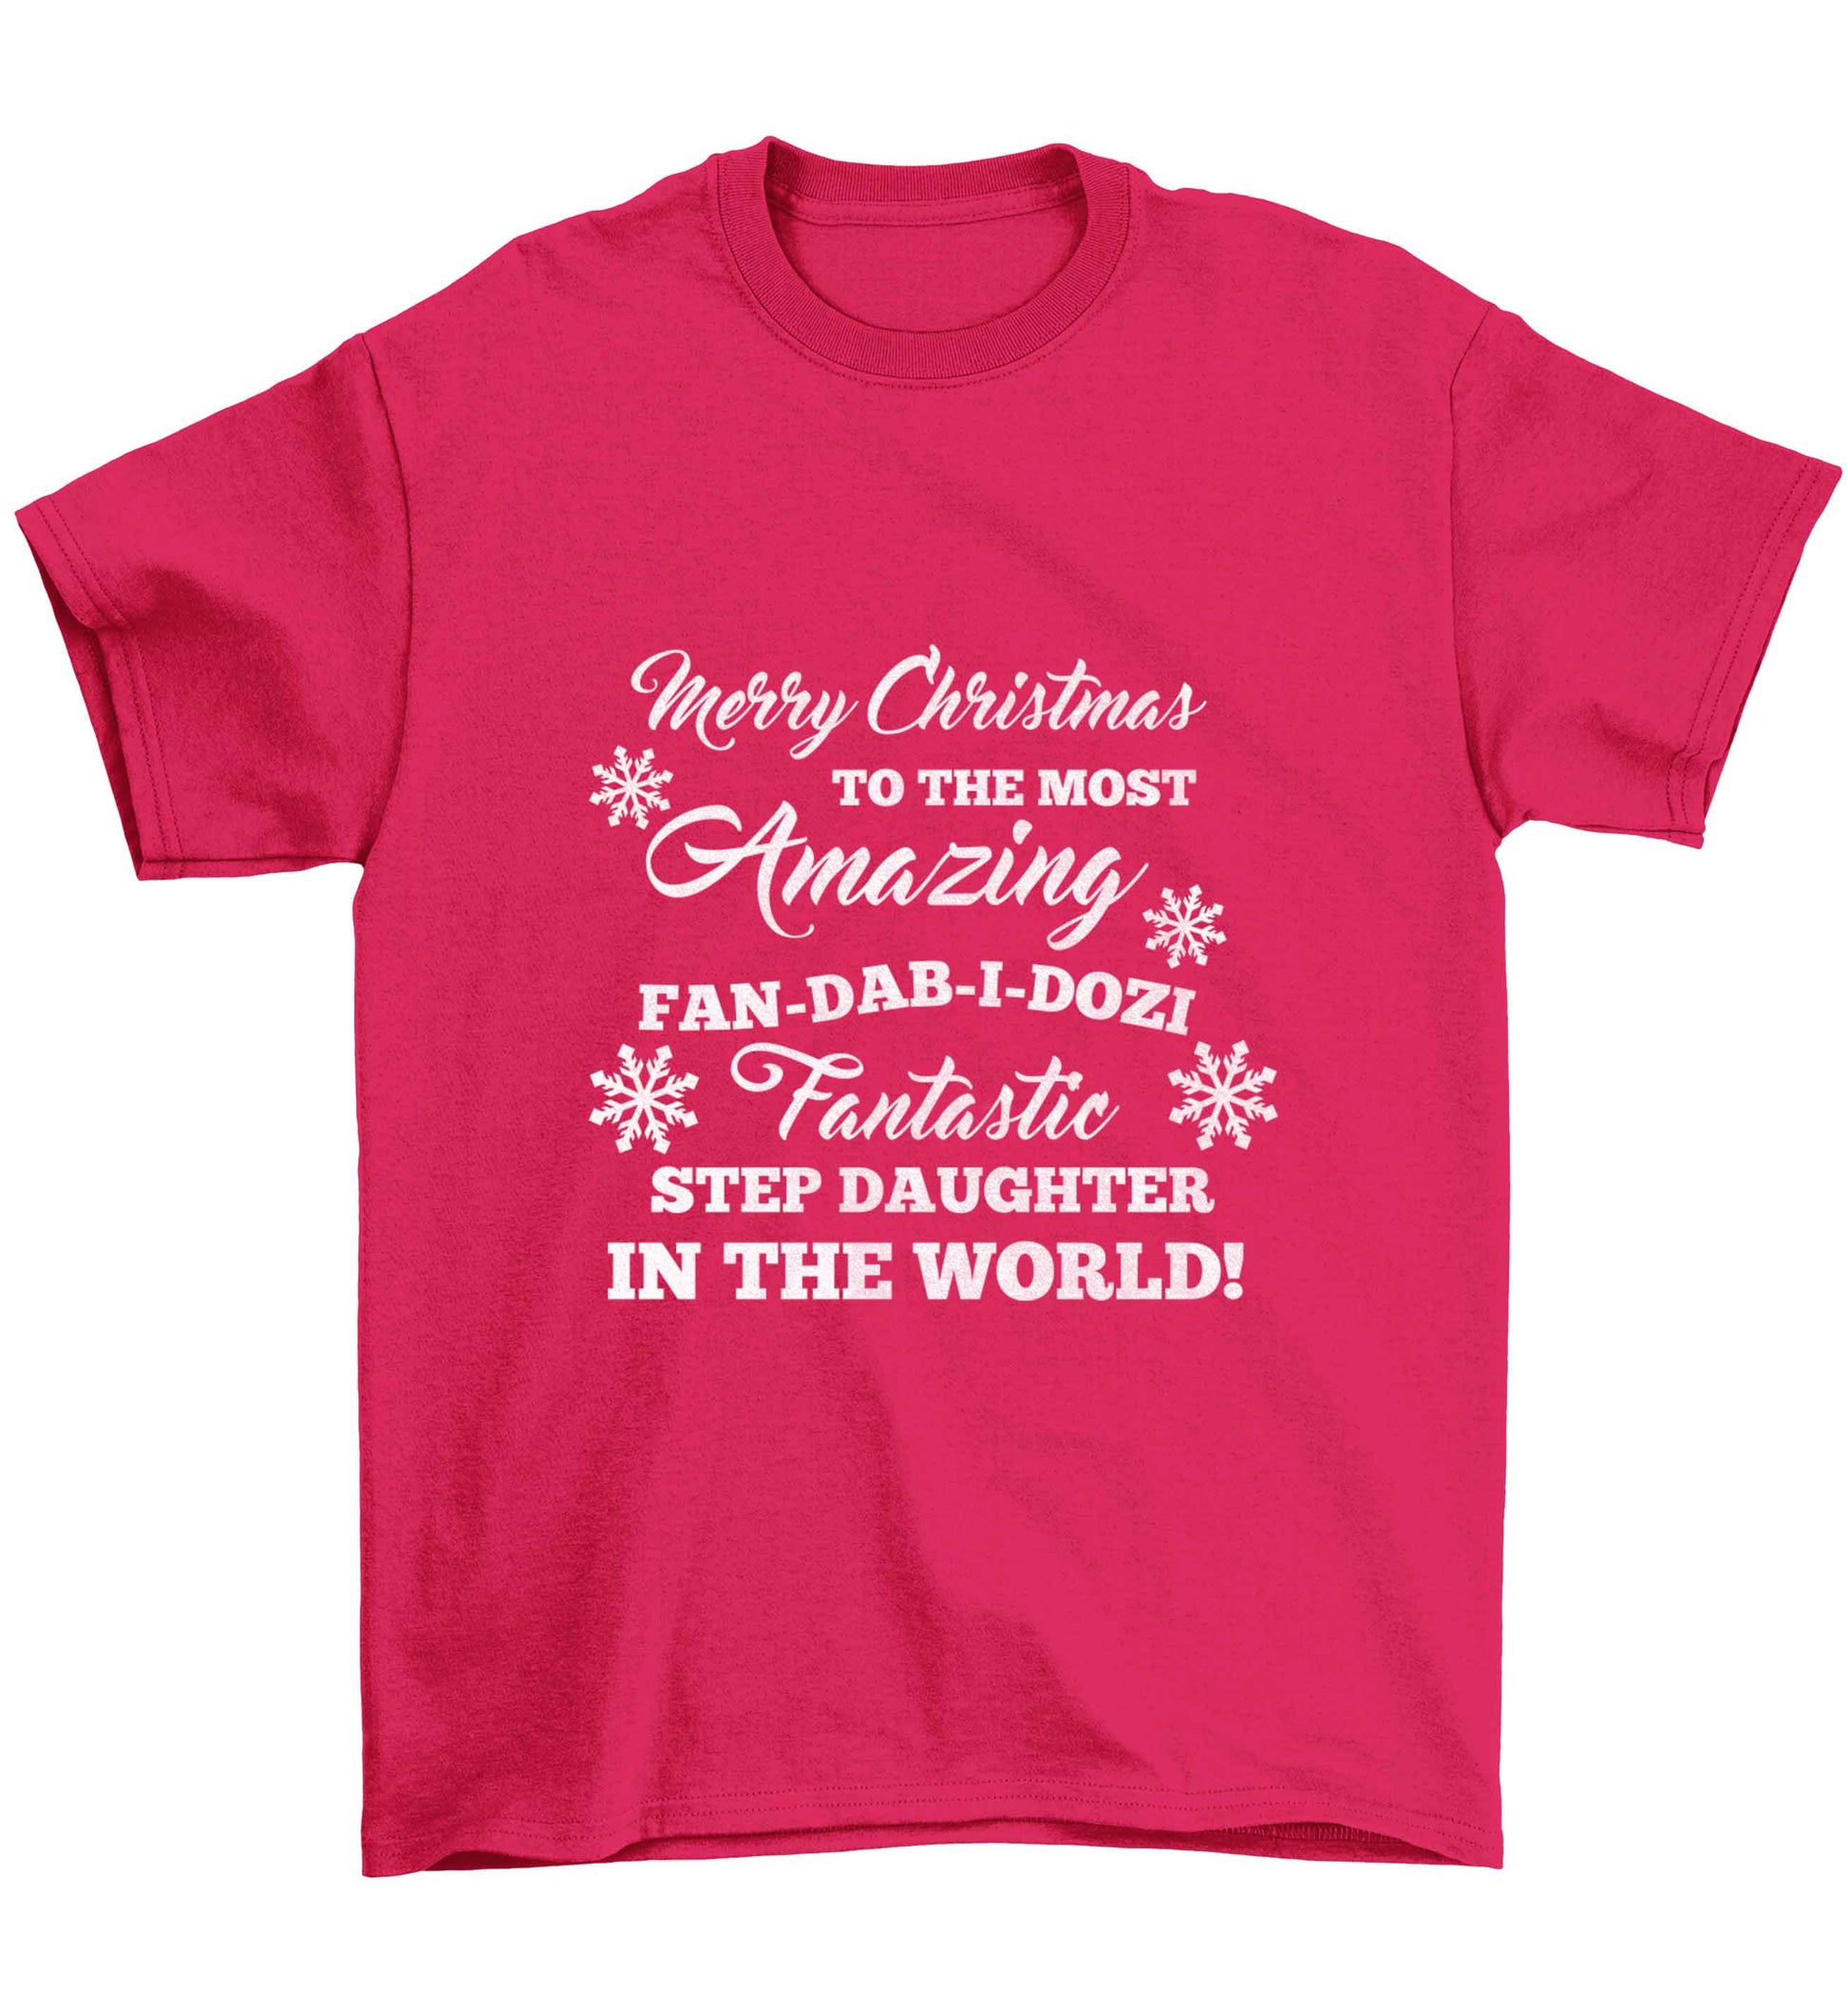 Merry Christmas to the most amazing fan-dab-i-dozi fantasic Step Daughter in the world Children's pink Tshirt 12-13 Years